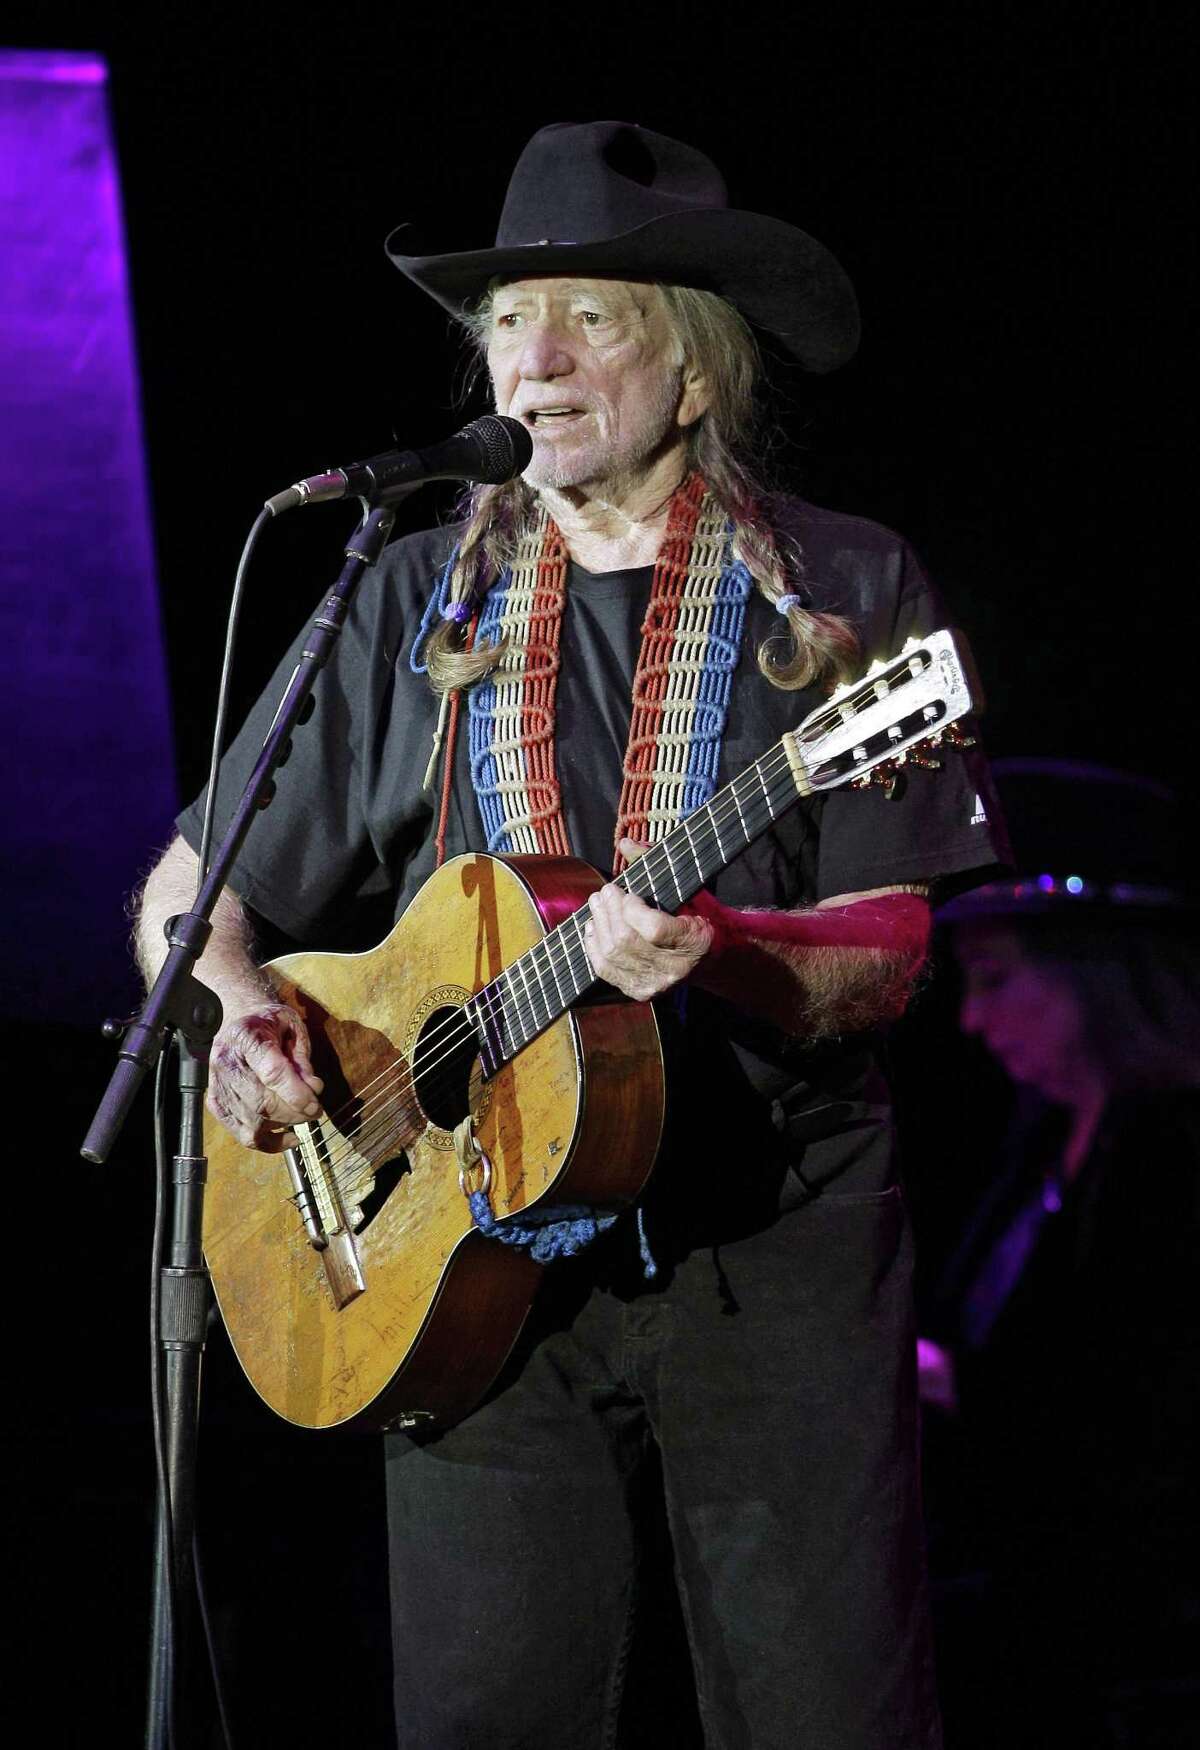 Country music icon Willie Nelson performs during a fundraising concert for U.S. Rep. Dennis Kucinich, D-Ohio, in Lorain, Ohio Sunday, Jan. 29, 2012. Redistricting has pitted Kucinich, a Cleveland Democrat, against Toledo area congresswoman Marcy Kaptur in the March primary. (AP Photo/Mark Duncan)